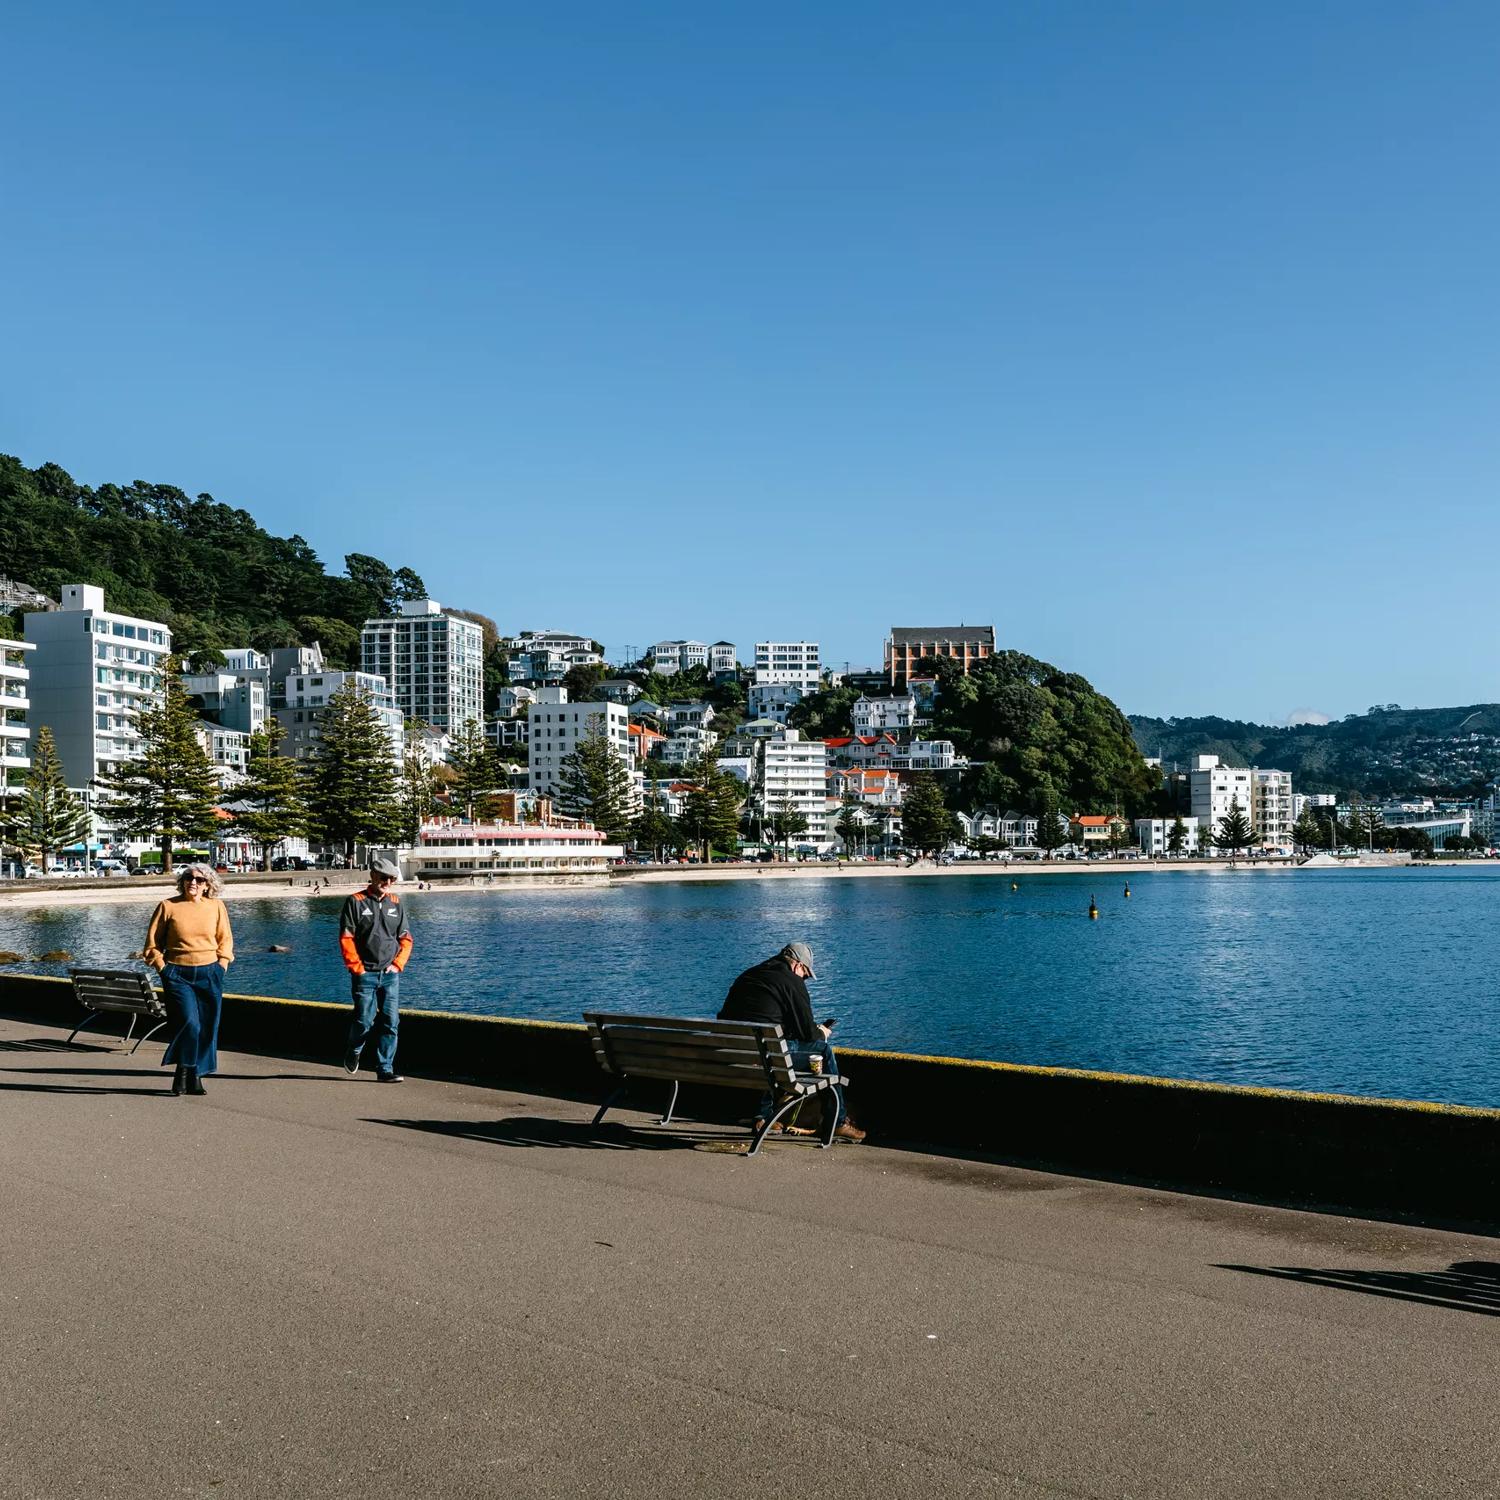 Looking towards Oriental bay with people walking along the waterfront and the fountain going in the water.